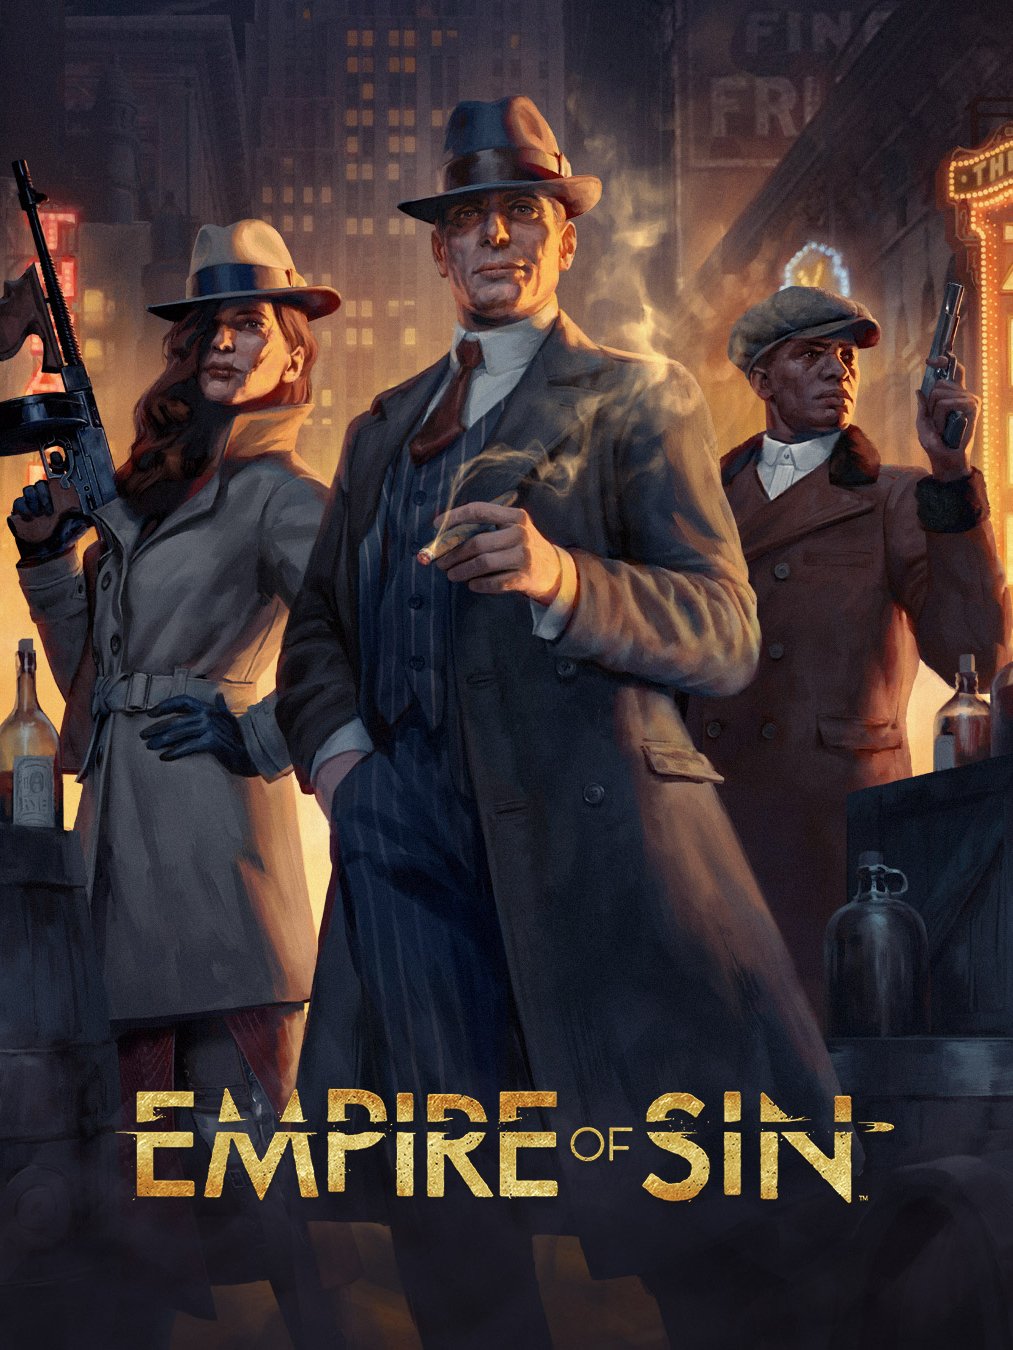 Image of Empire of Sin